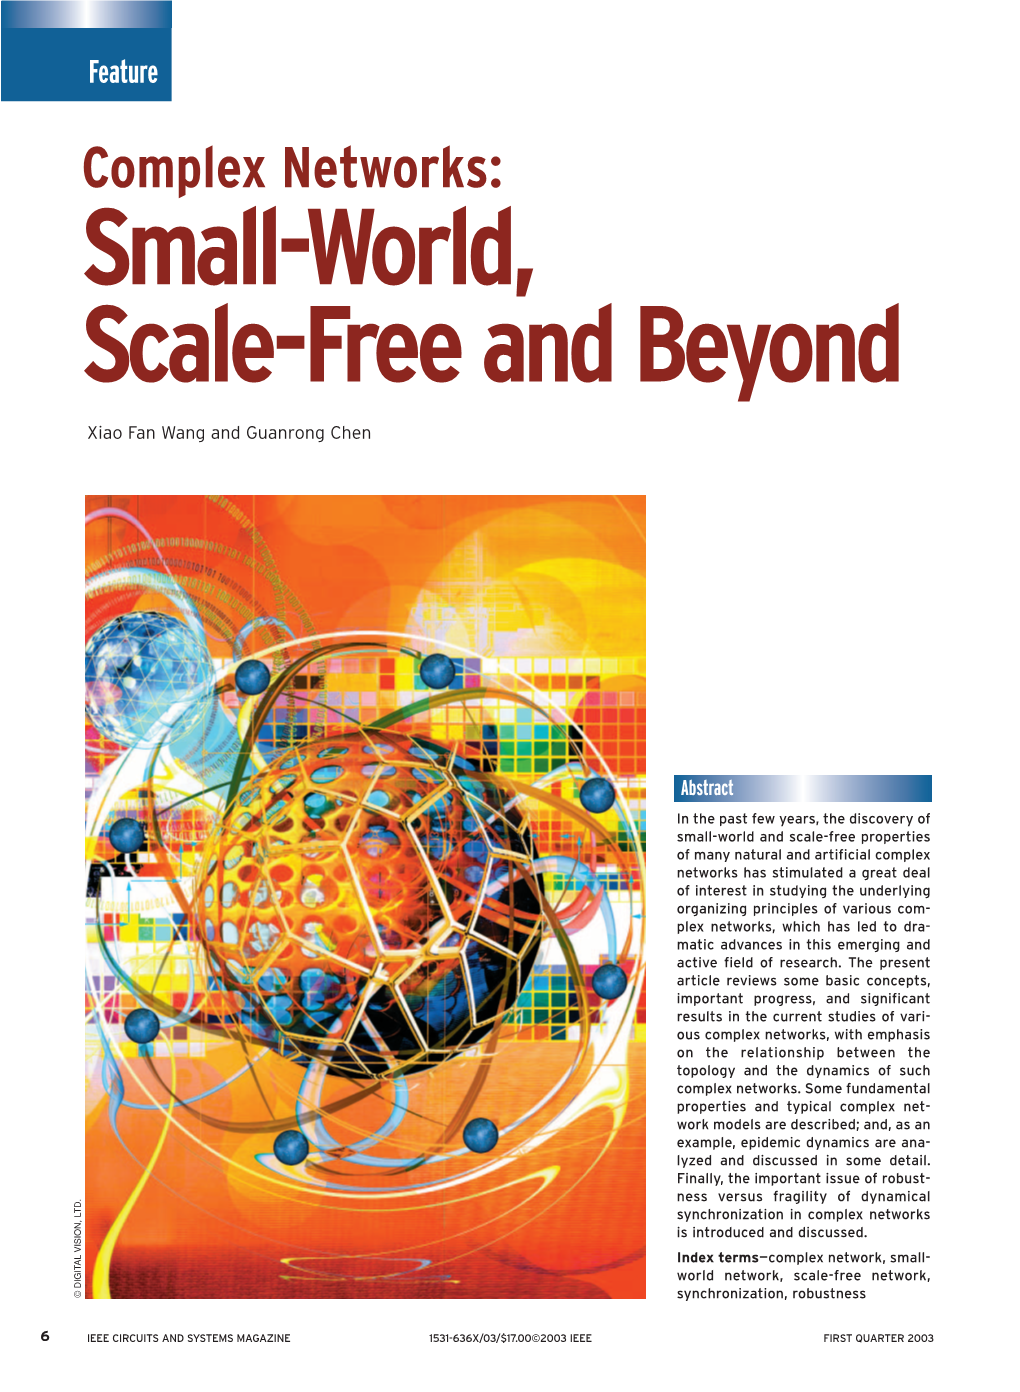 Complex Networks: Small-World, Scale-Free and Beyond